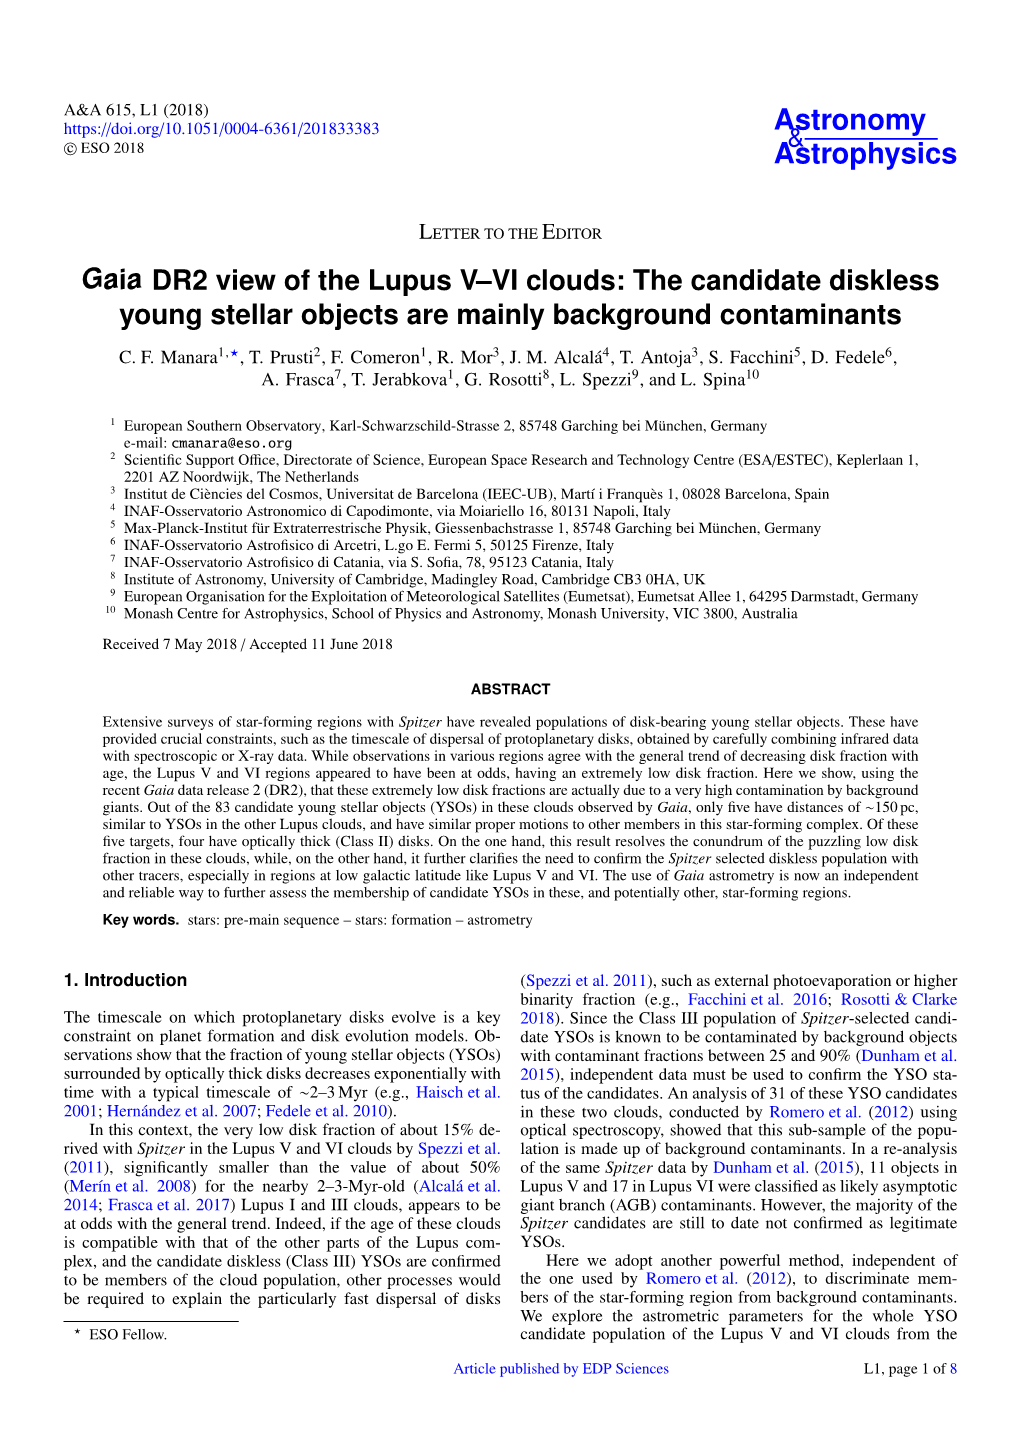 Gaia DR2 View of the Lupus V–VI Clouds: the Candidate Diskless Young Stellar Objects Are Mainly Background Contaminants C